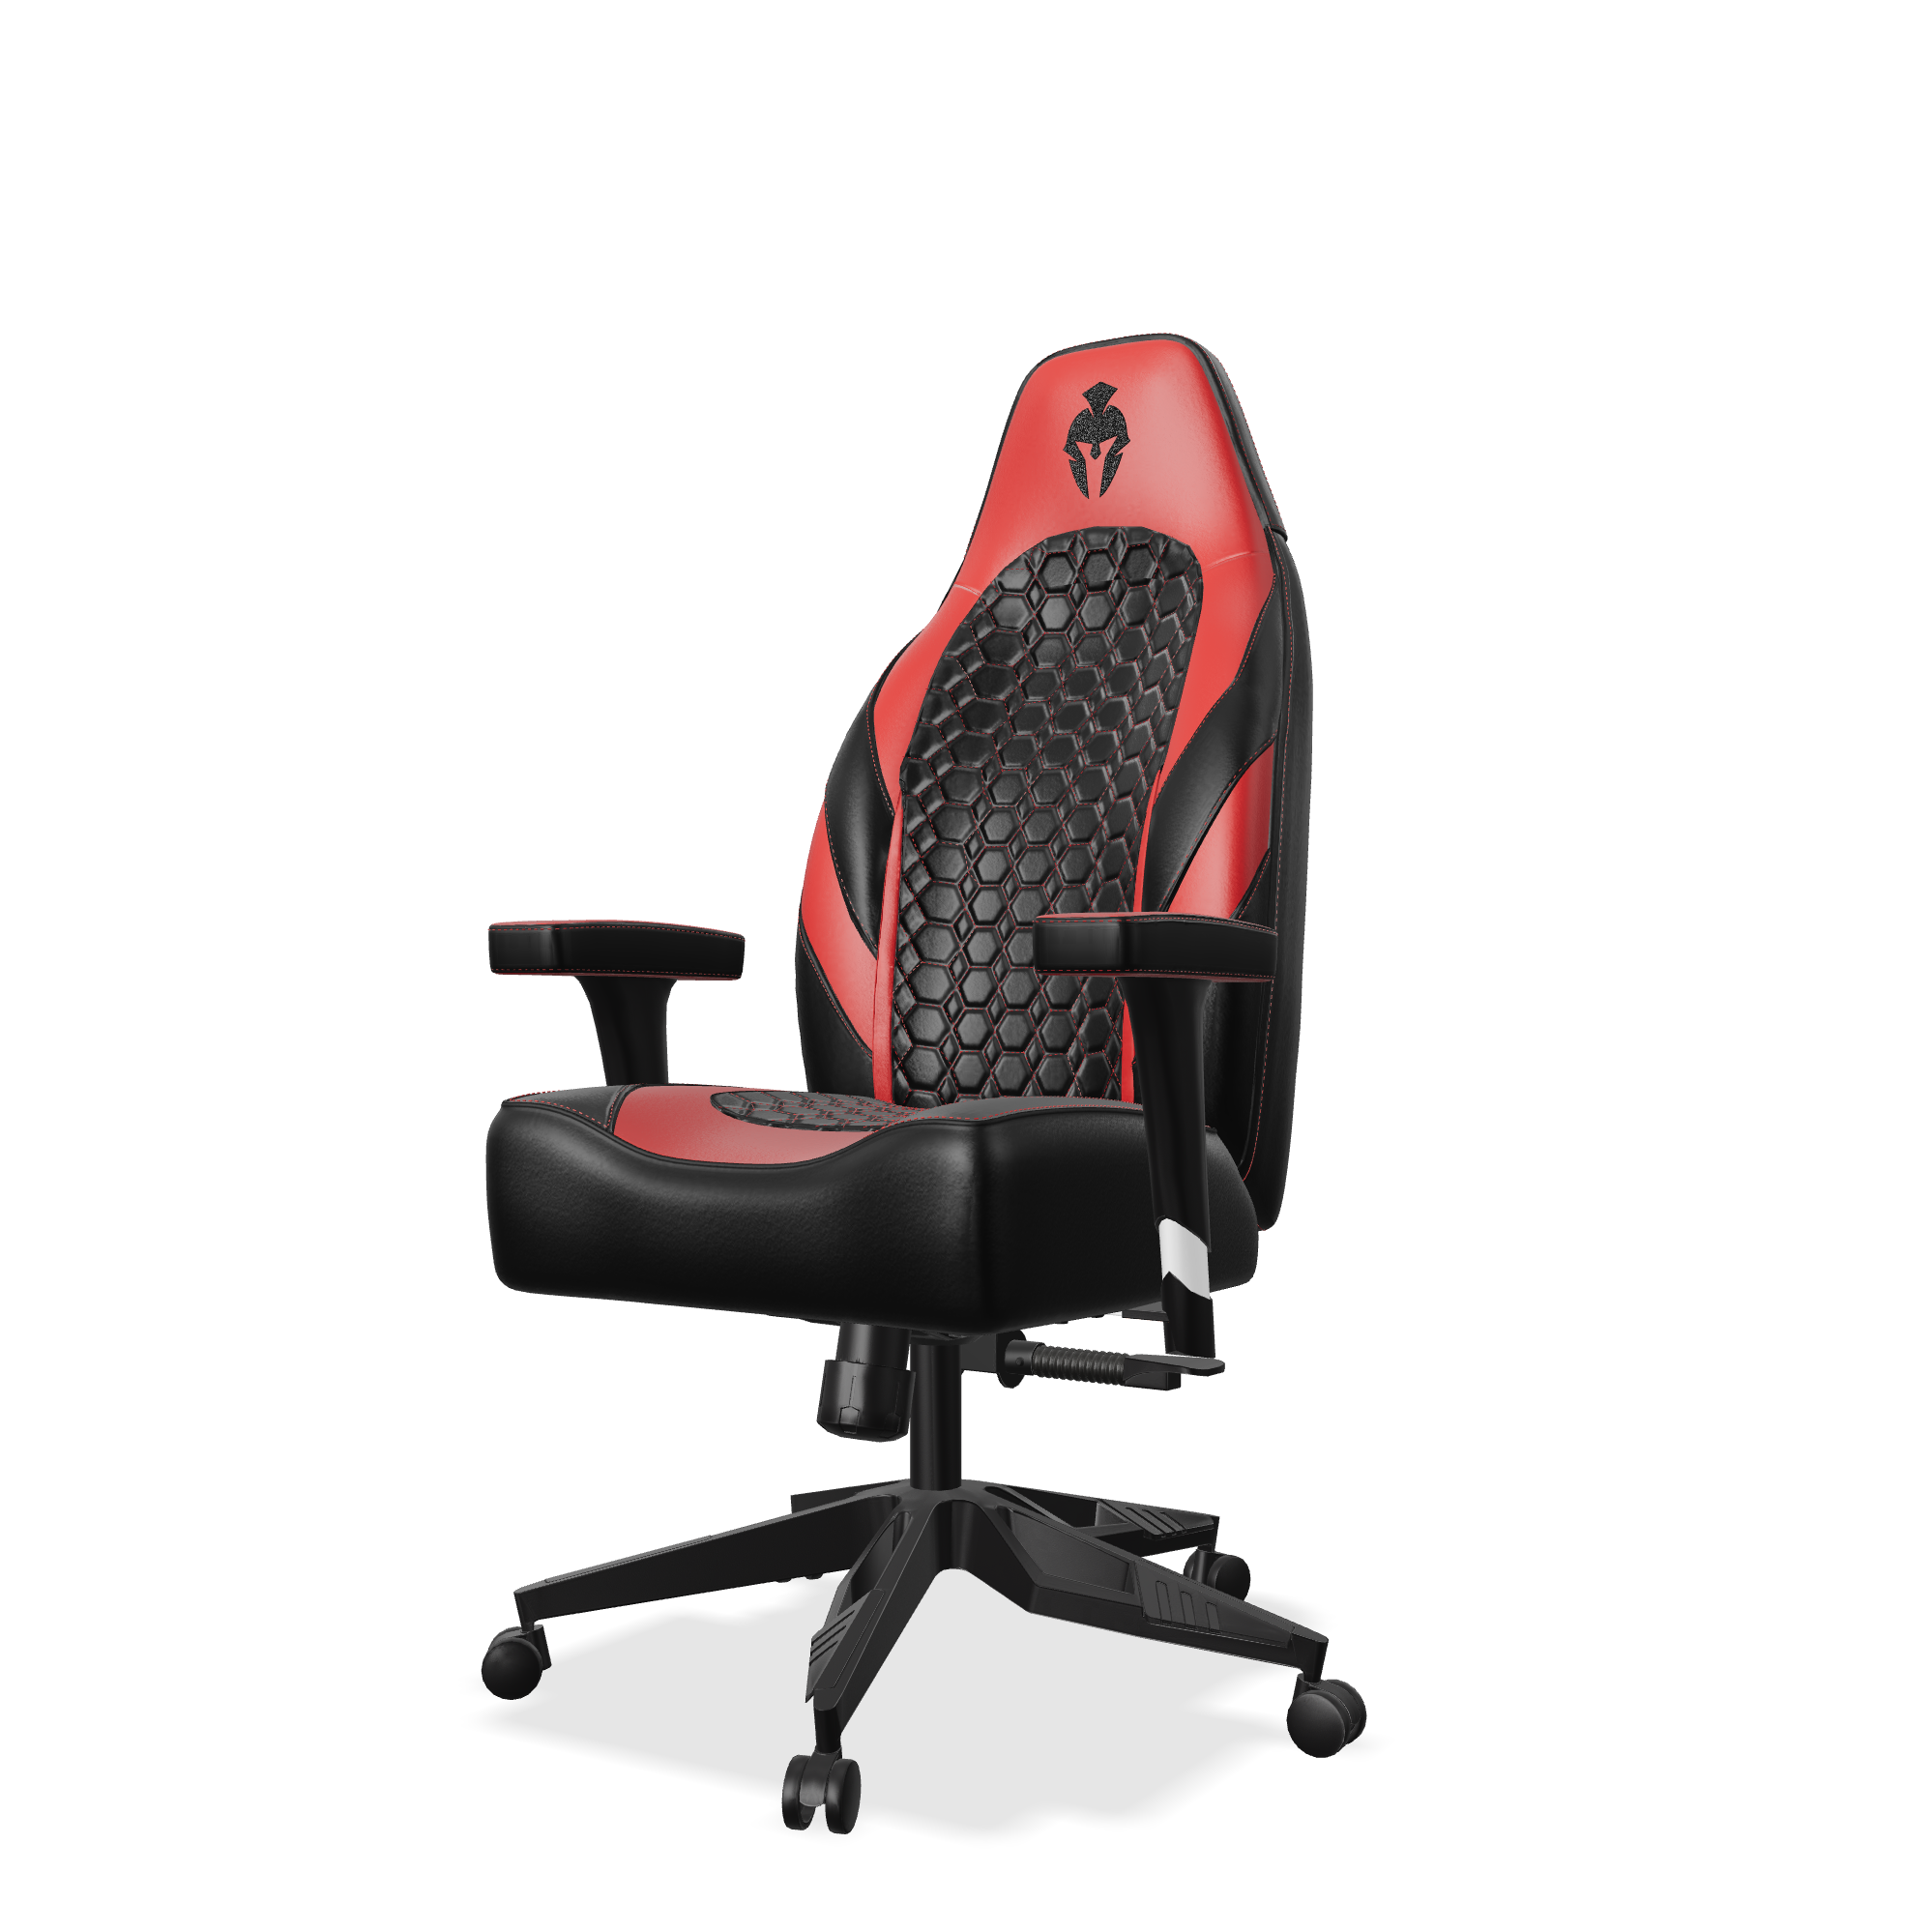 Red and black gaming chair side view